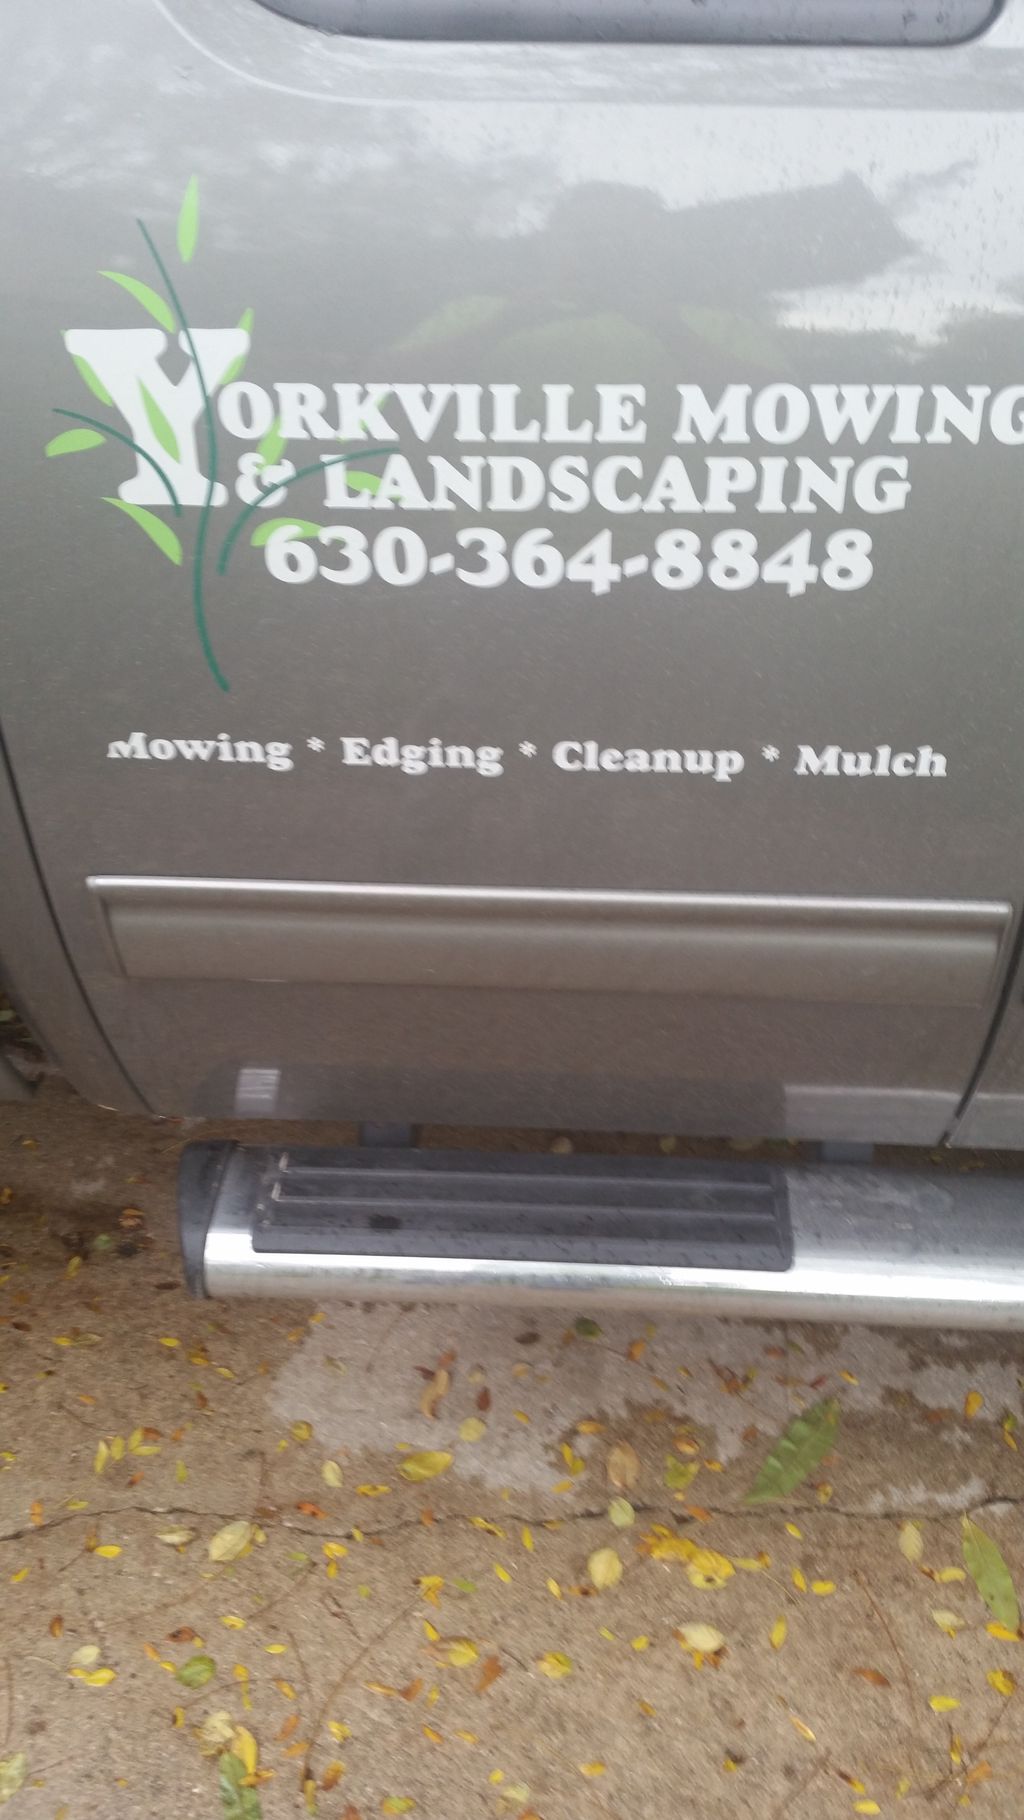 Yorkville Mowing and Landscaping